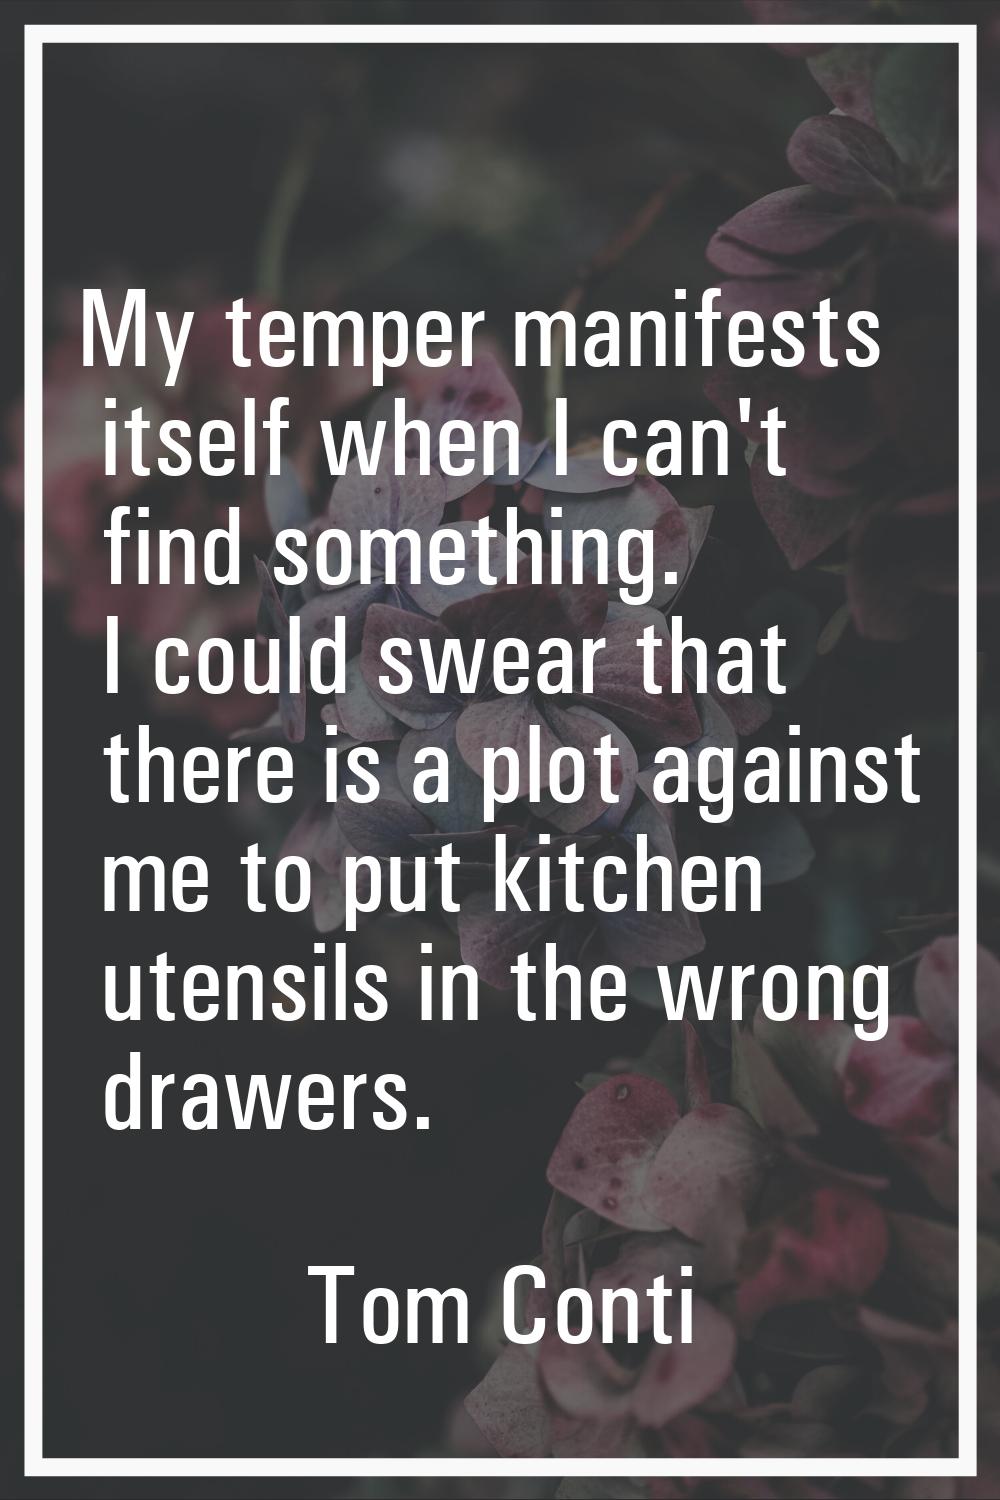 My temper manifests itself when I can't find something. I could swear that there is a plot against 